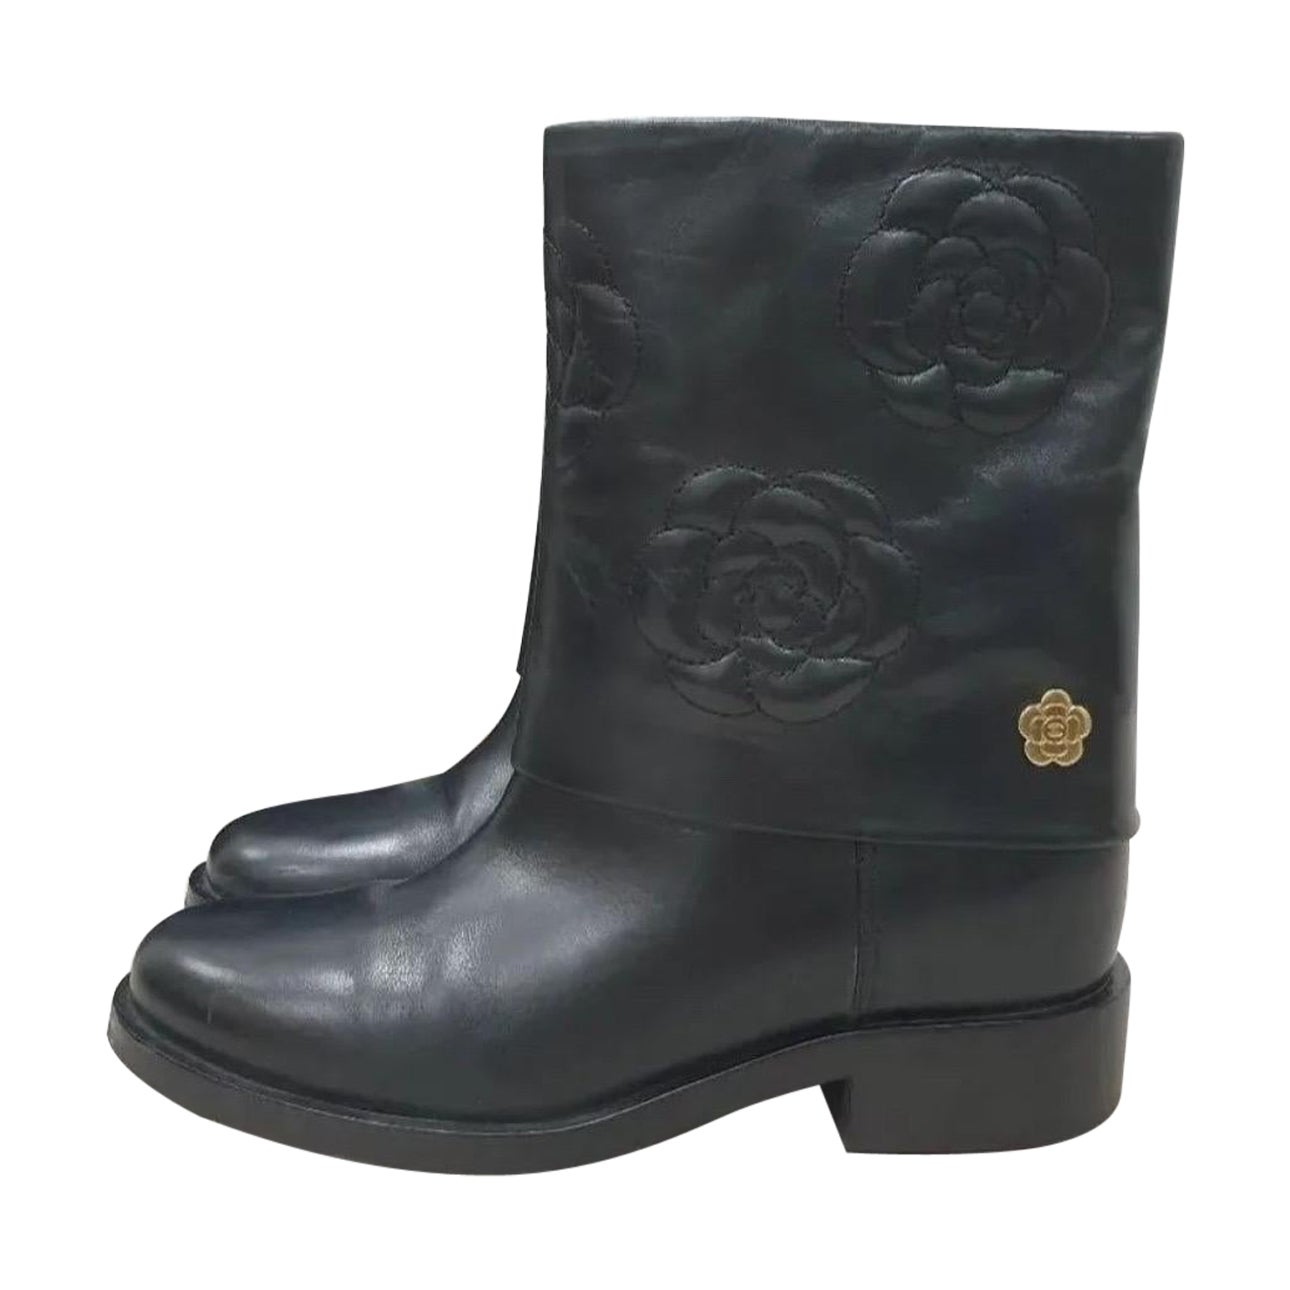 CHANEL 2016 Camellia Flower Black Leather Mid Calf Boots For Sale